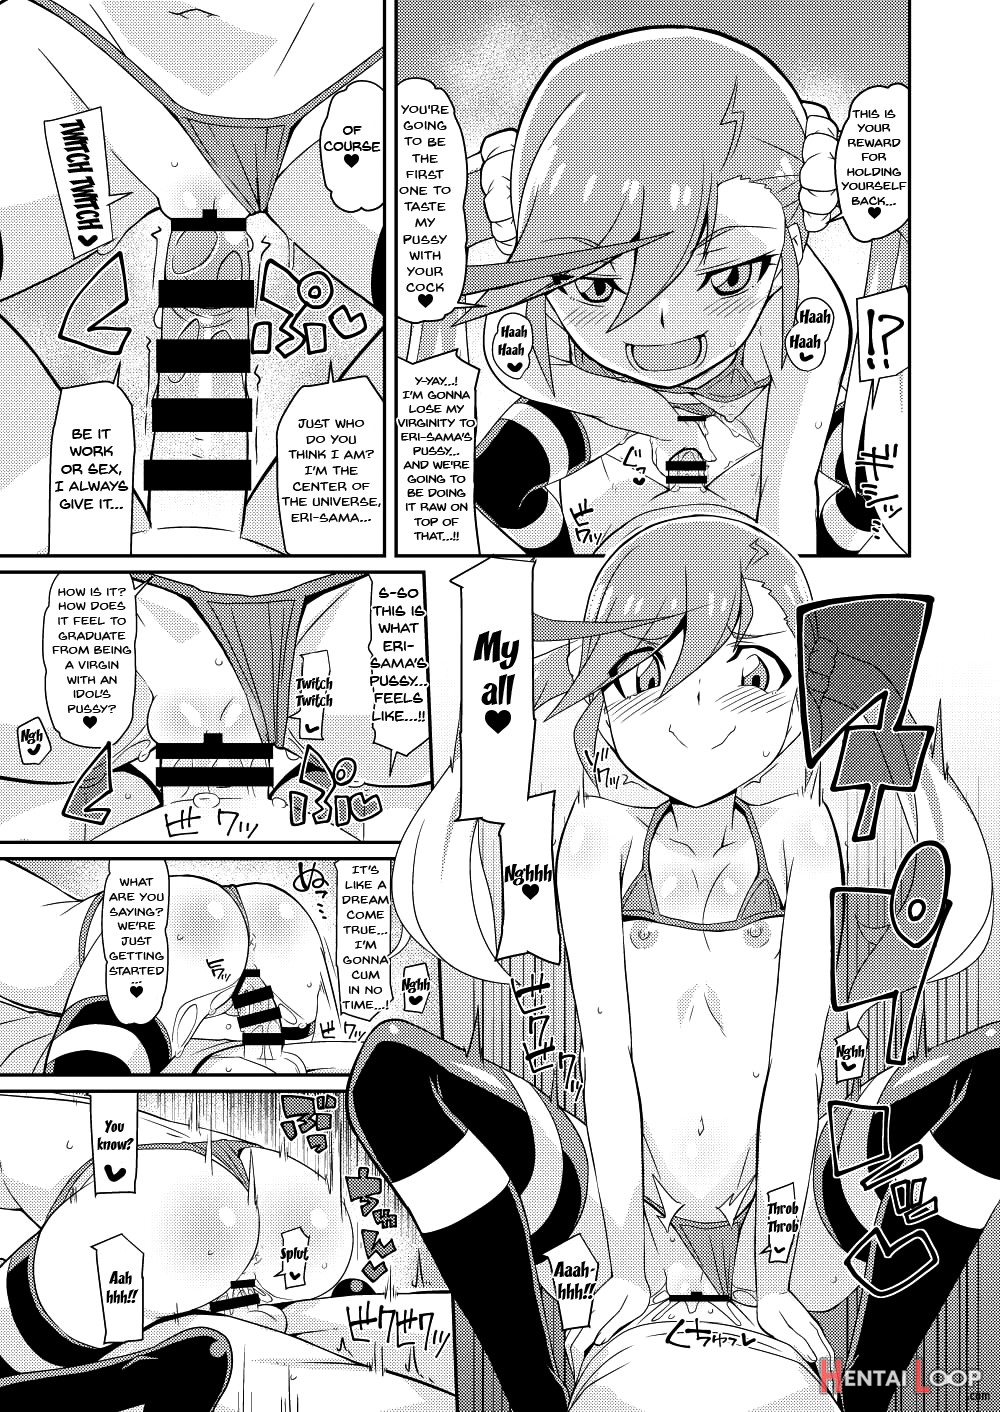 Eri-sama's Open For Business page 8